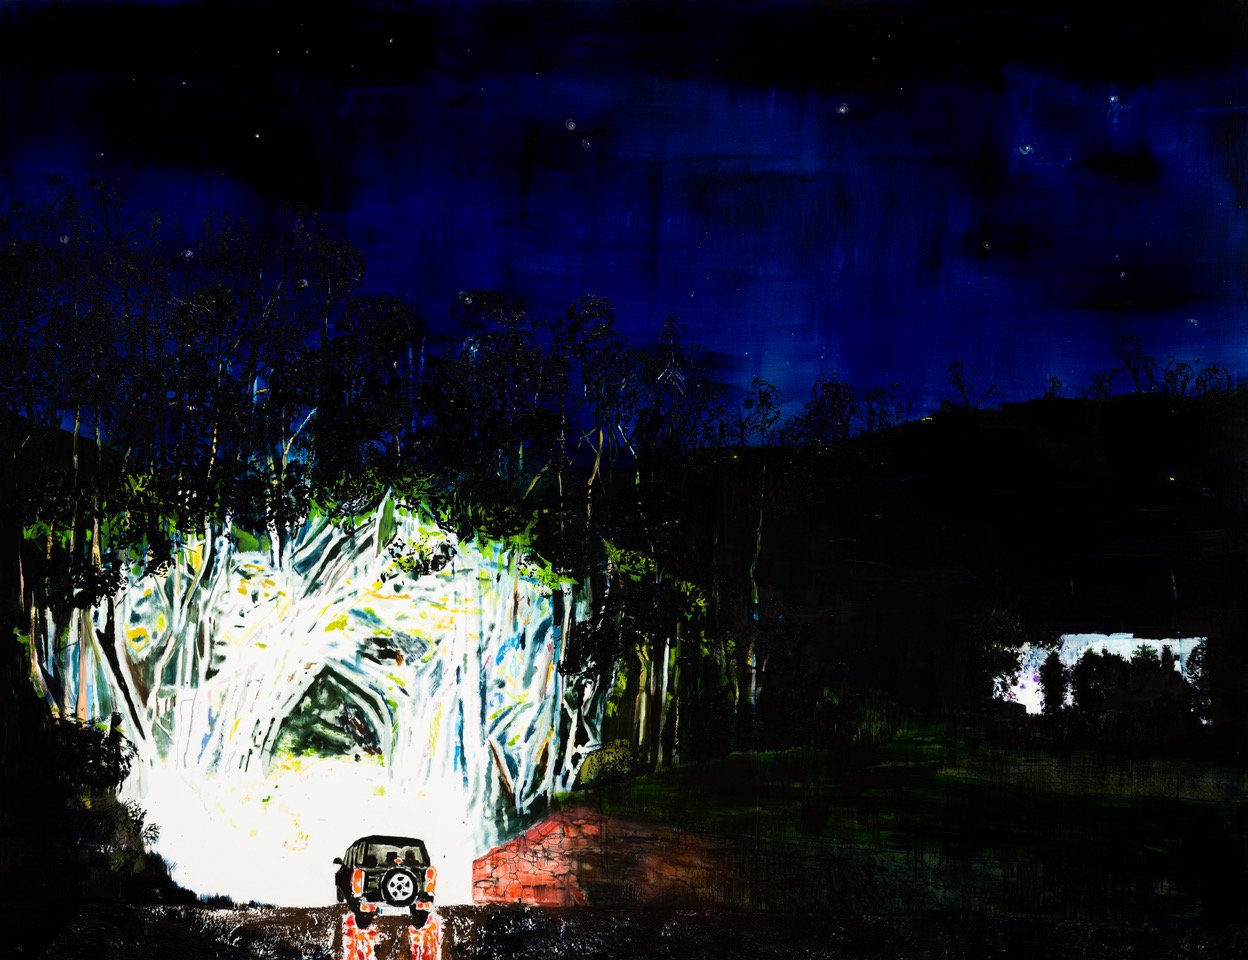   Home and away (iv), 2021  Acrylic, oil and automotive paint on linen  200 x 260cm 